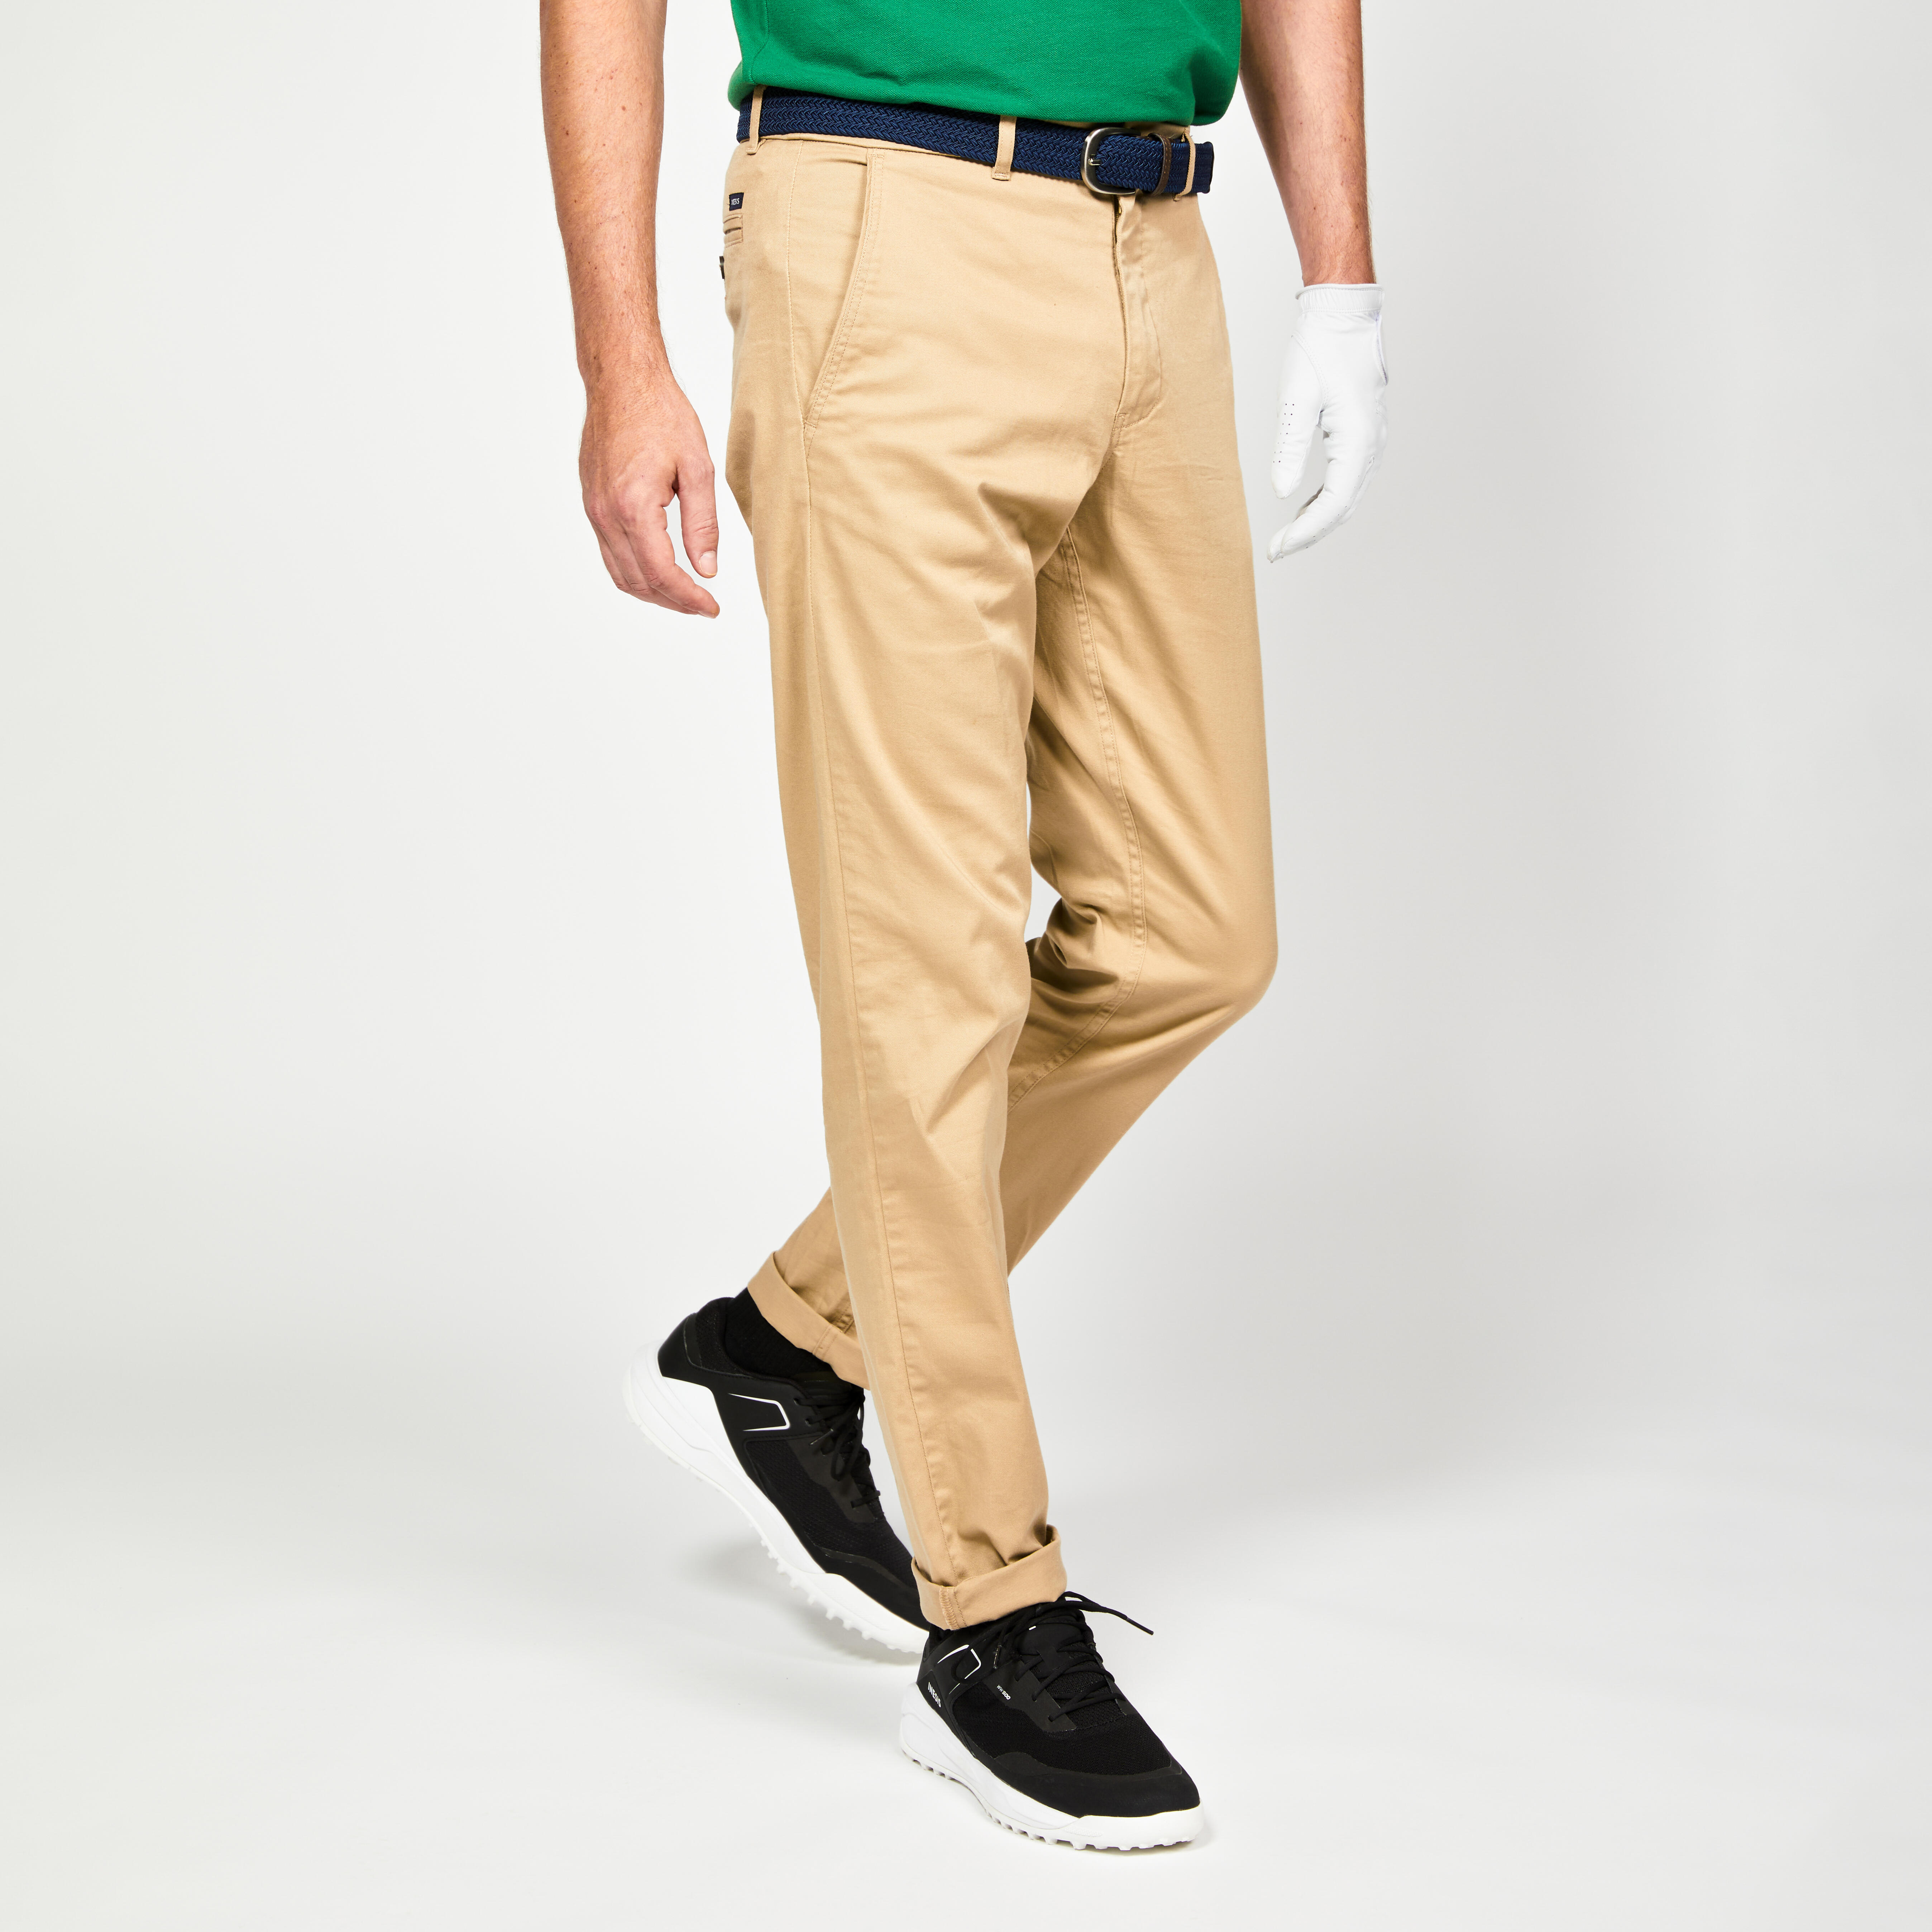 Buy Peanut Brown Chinos for Men Online in India at Beyoung